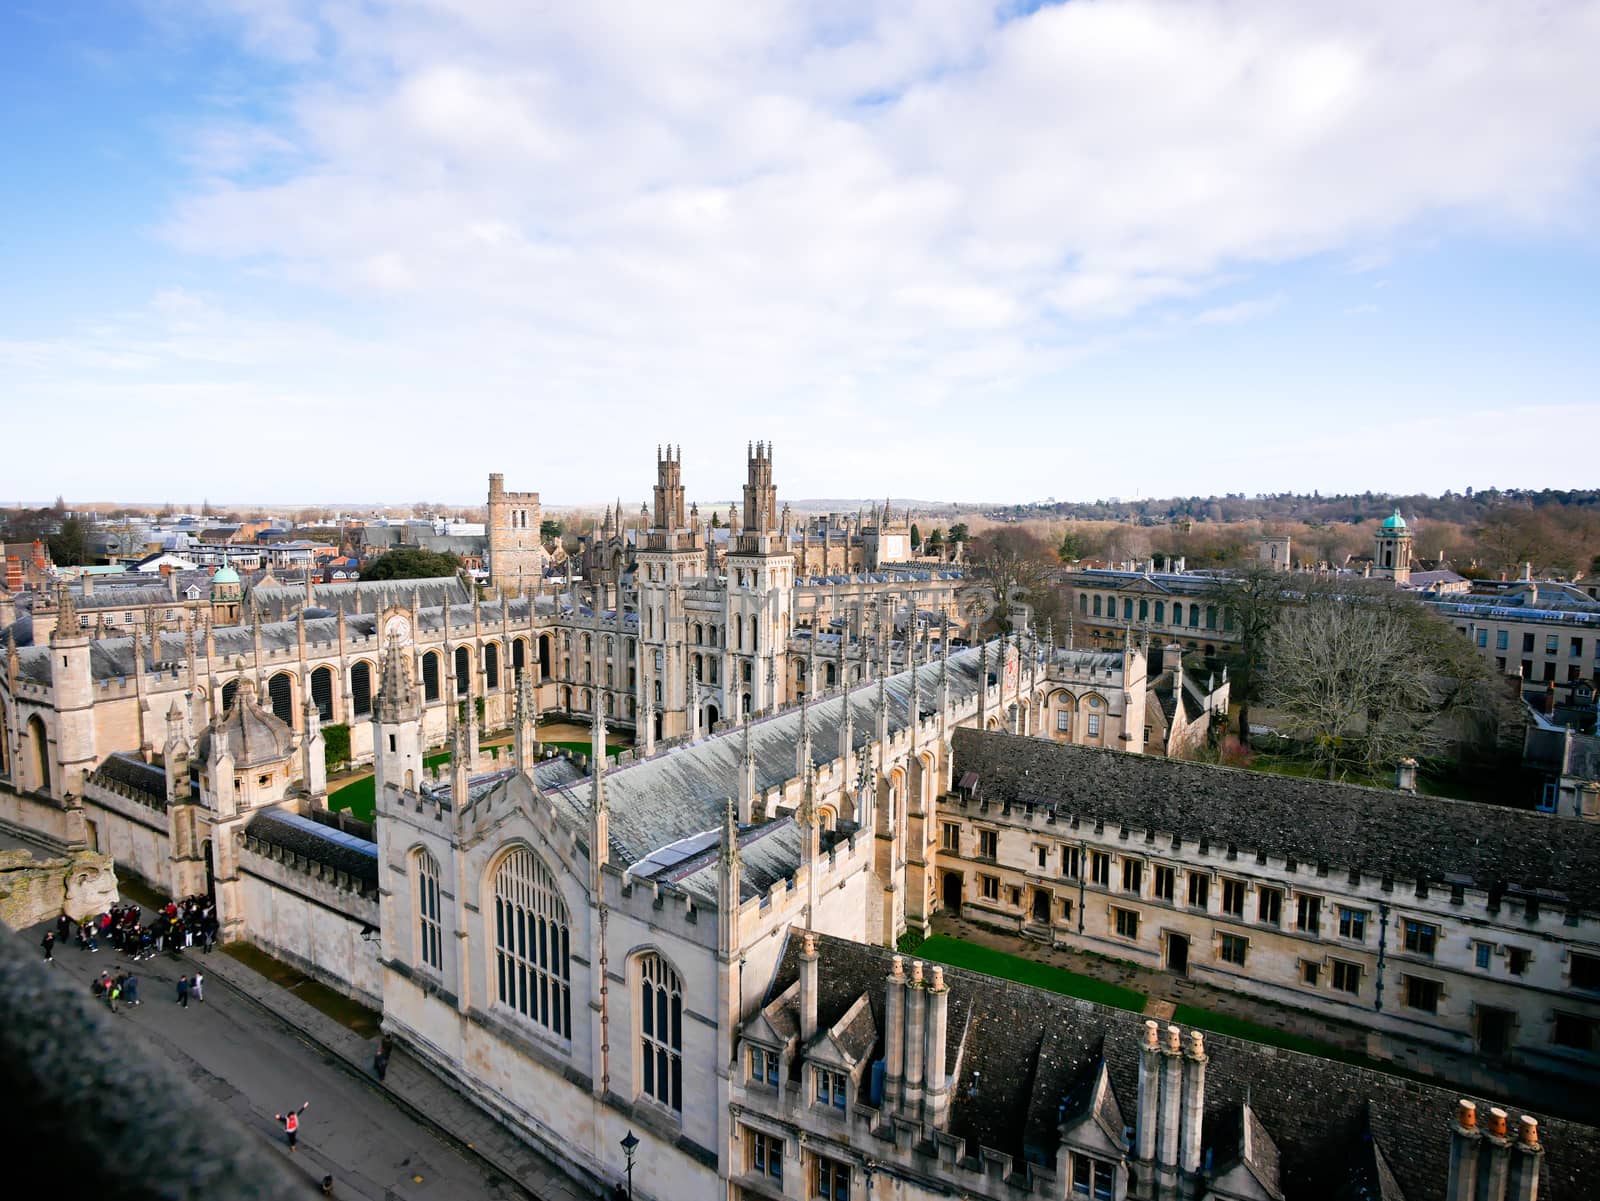 Oxford city from the top view by Alicephoto